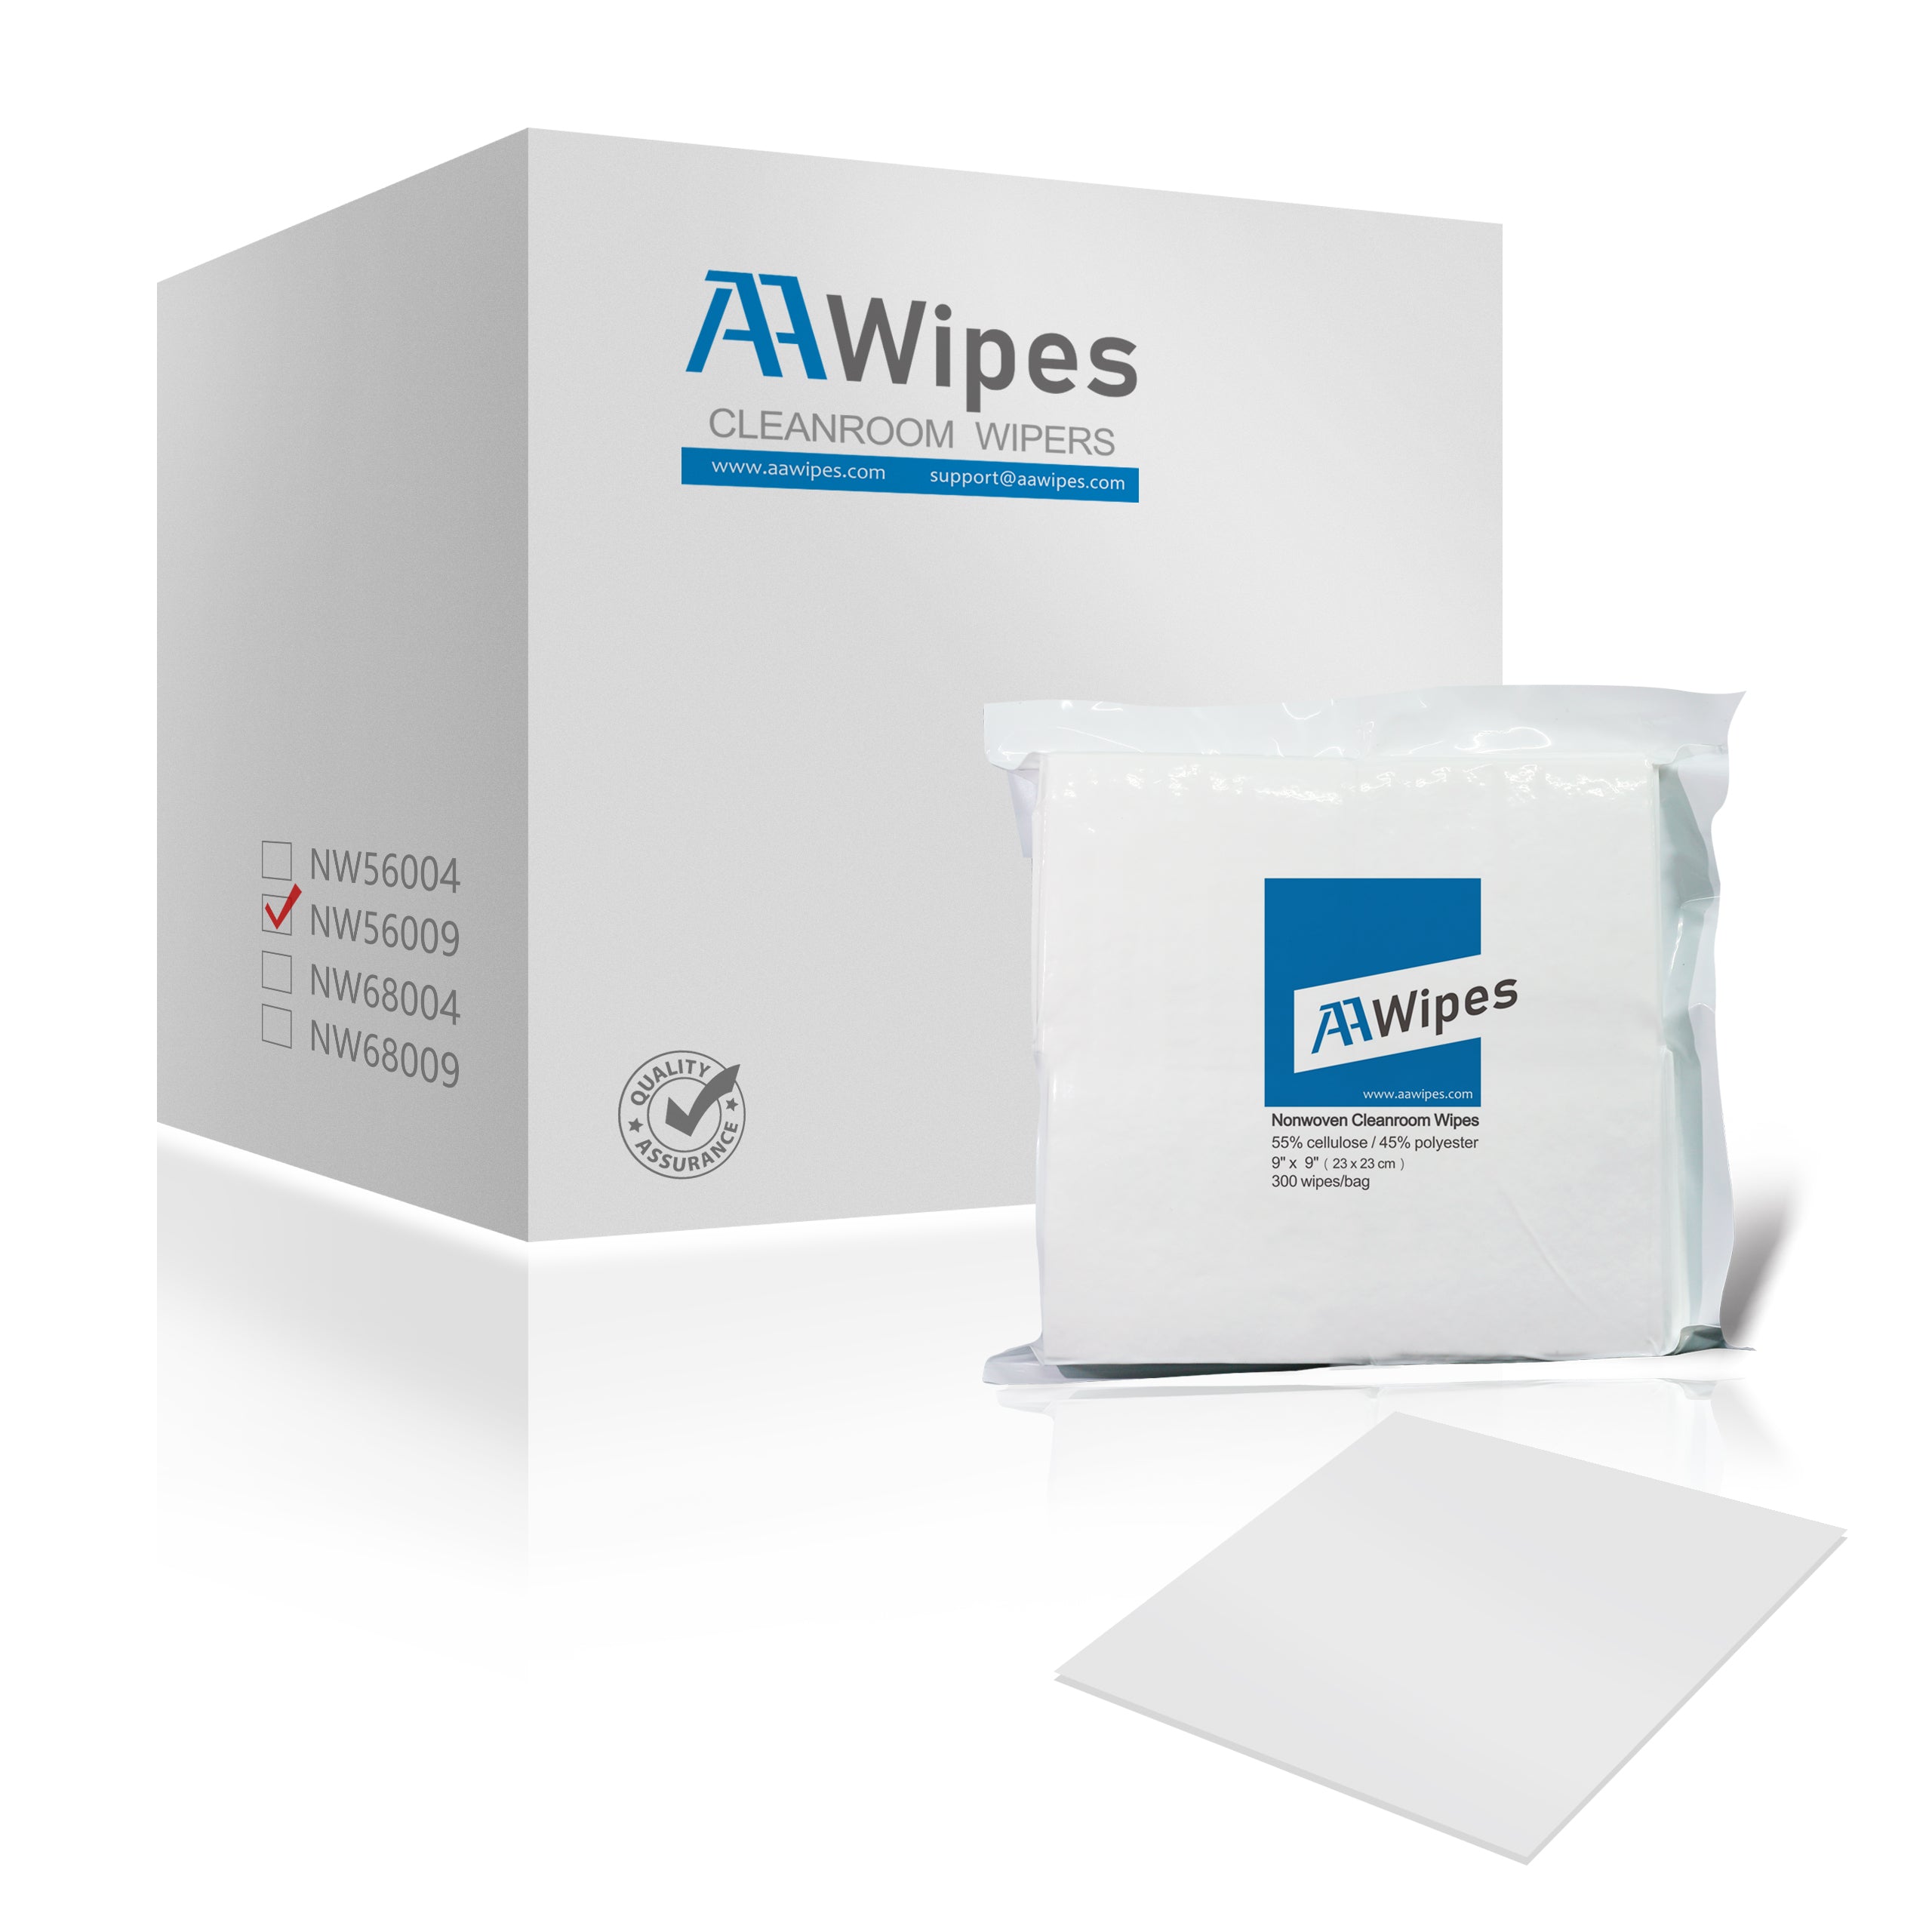 AAwipes nonwoven  wipes offers excellent wet and dry strength, superior oil absorbency, and resistance to abrasion and chemicals. Designed for cost-effective, all-purpose wiping and suitable for cleaning precision components and lab apparatus.